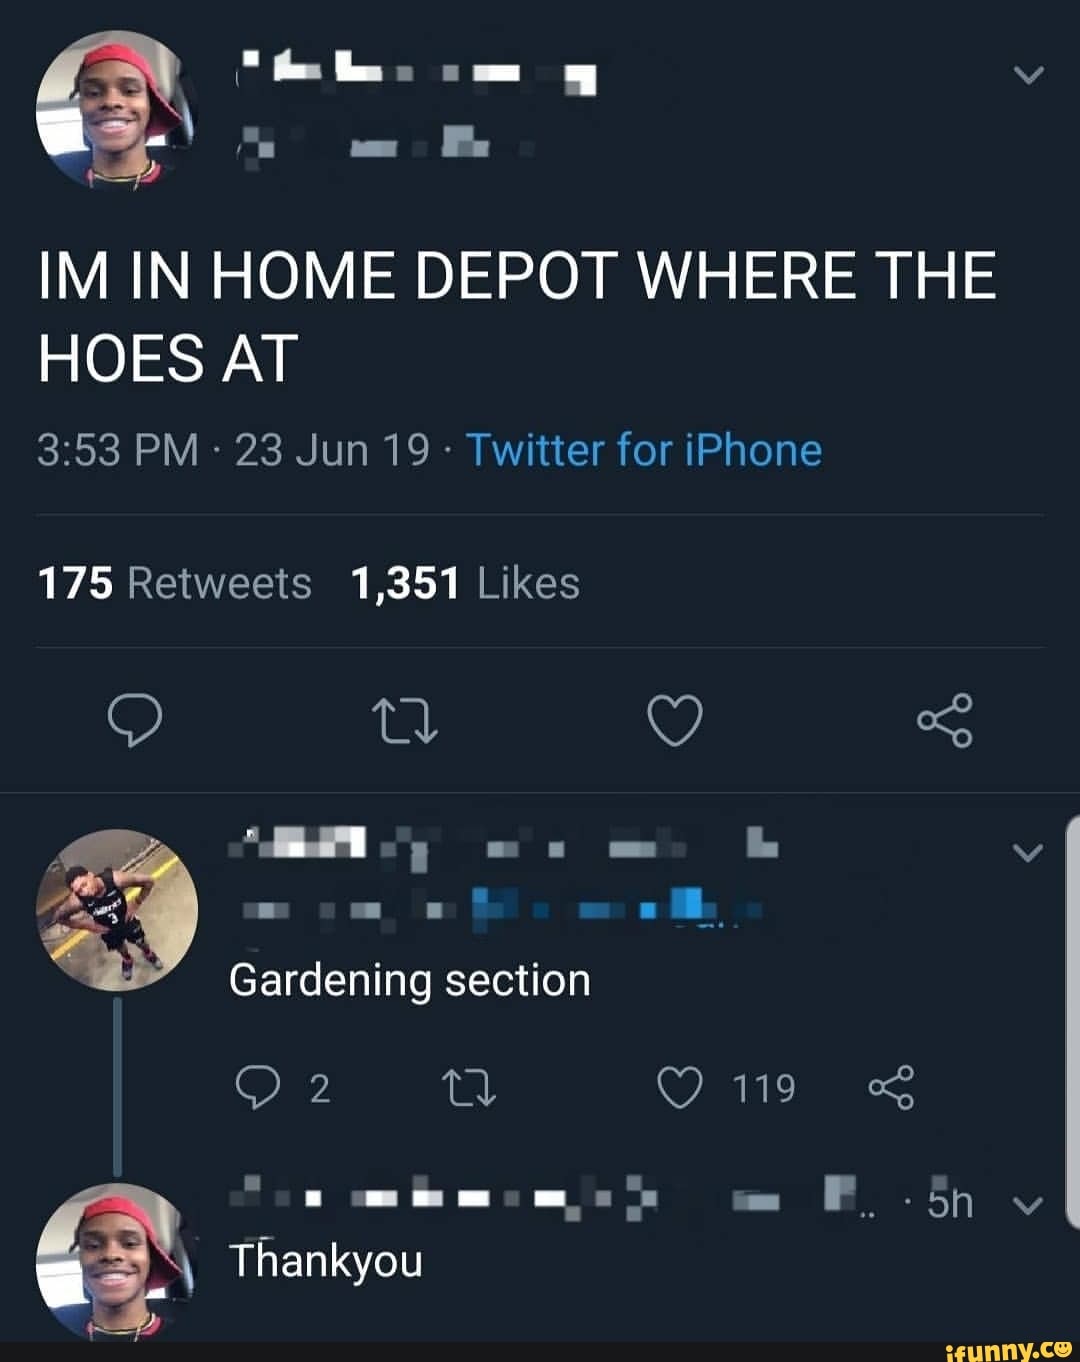 hoes at home depot meme - Im In Home Depot Where The Hoes At 23 Jun 19. Twitter for iPhone 175 1,351 le 22 Gardening section 02 22 L Thankyou o 119 8 E..5h v ifunny.co